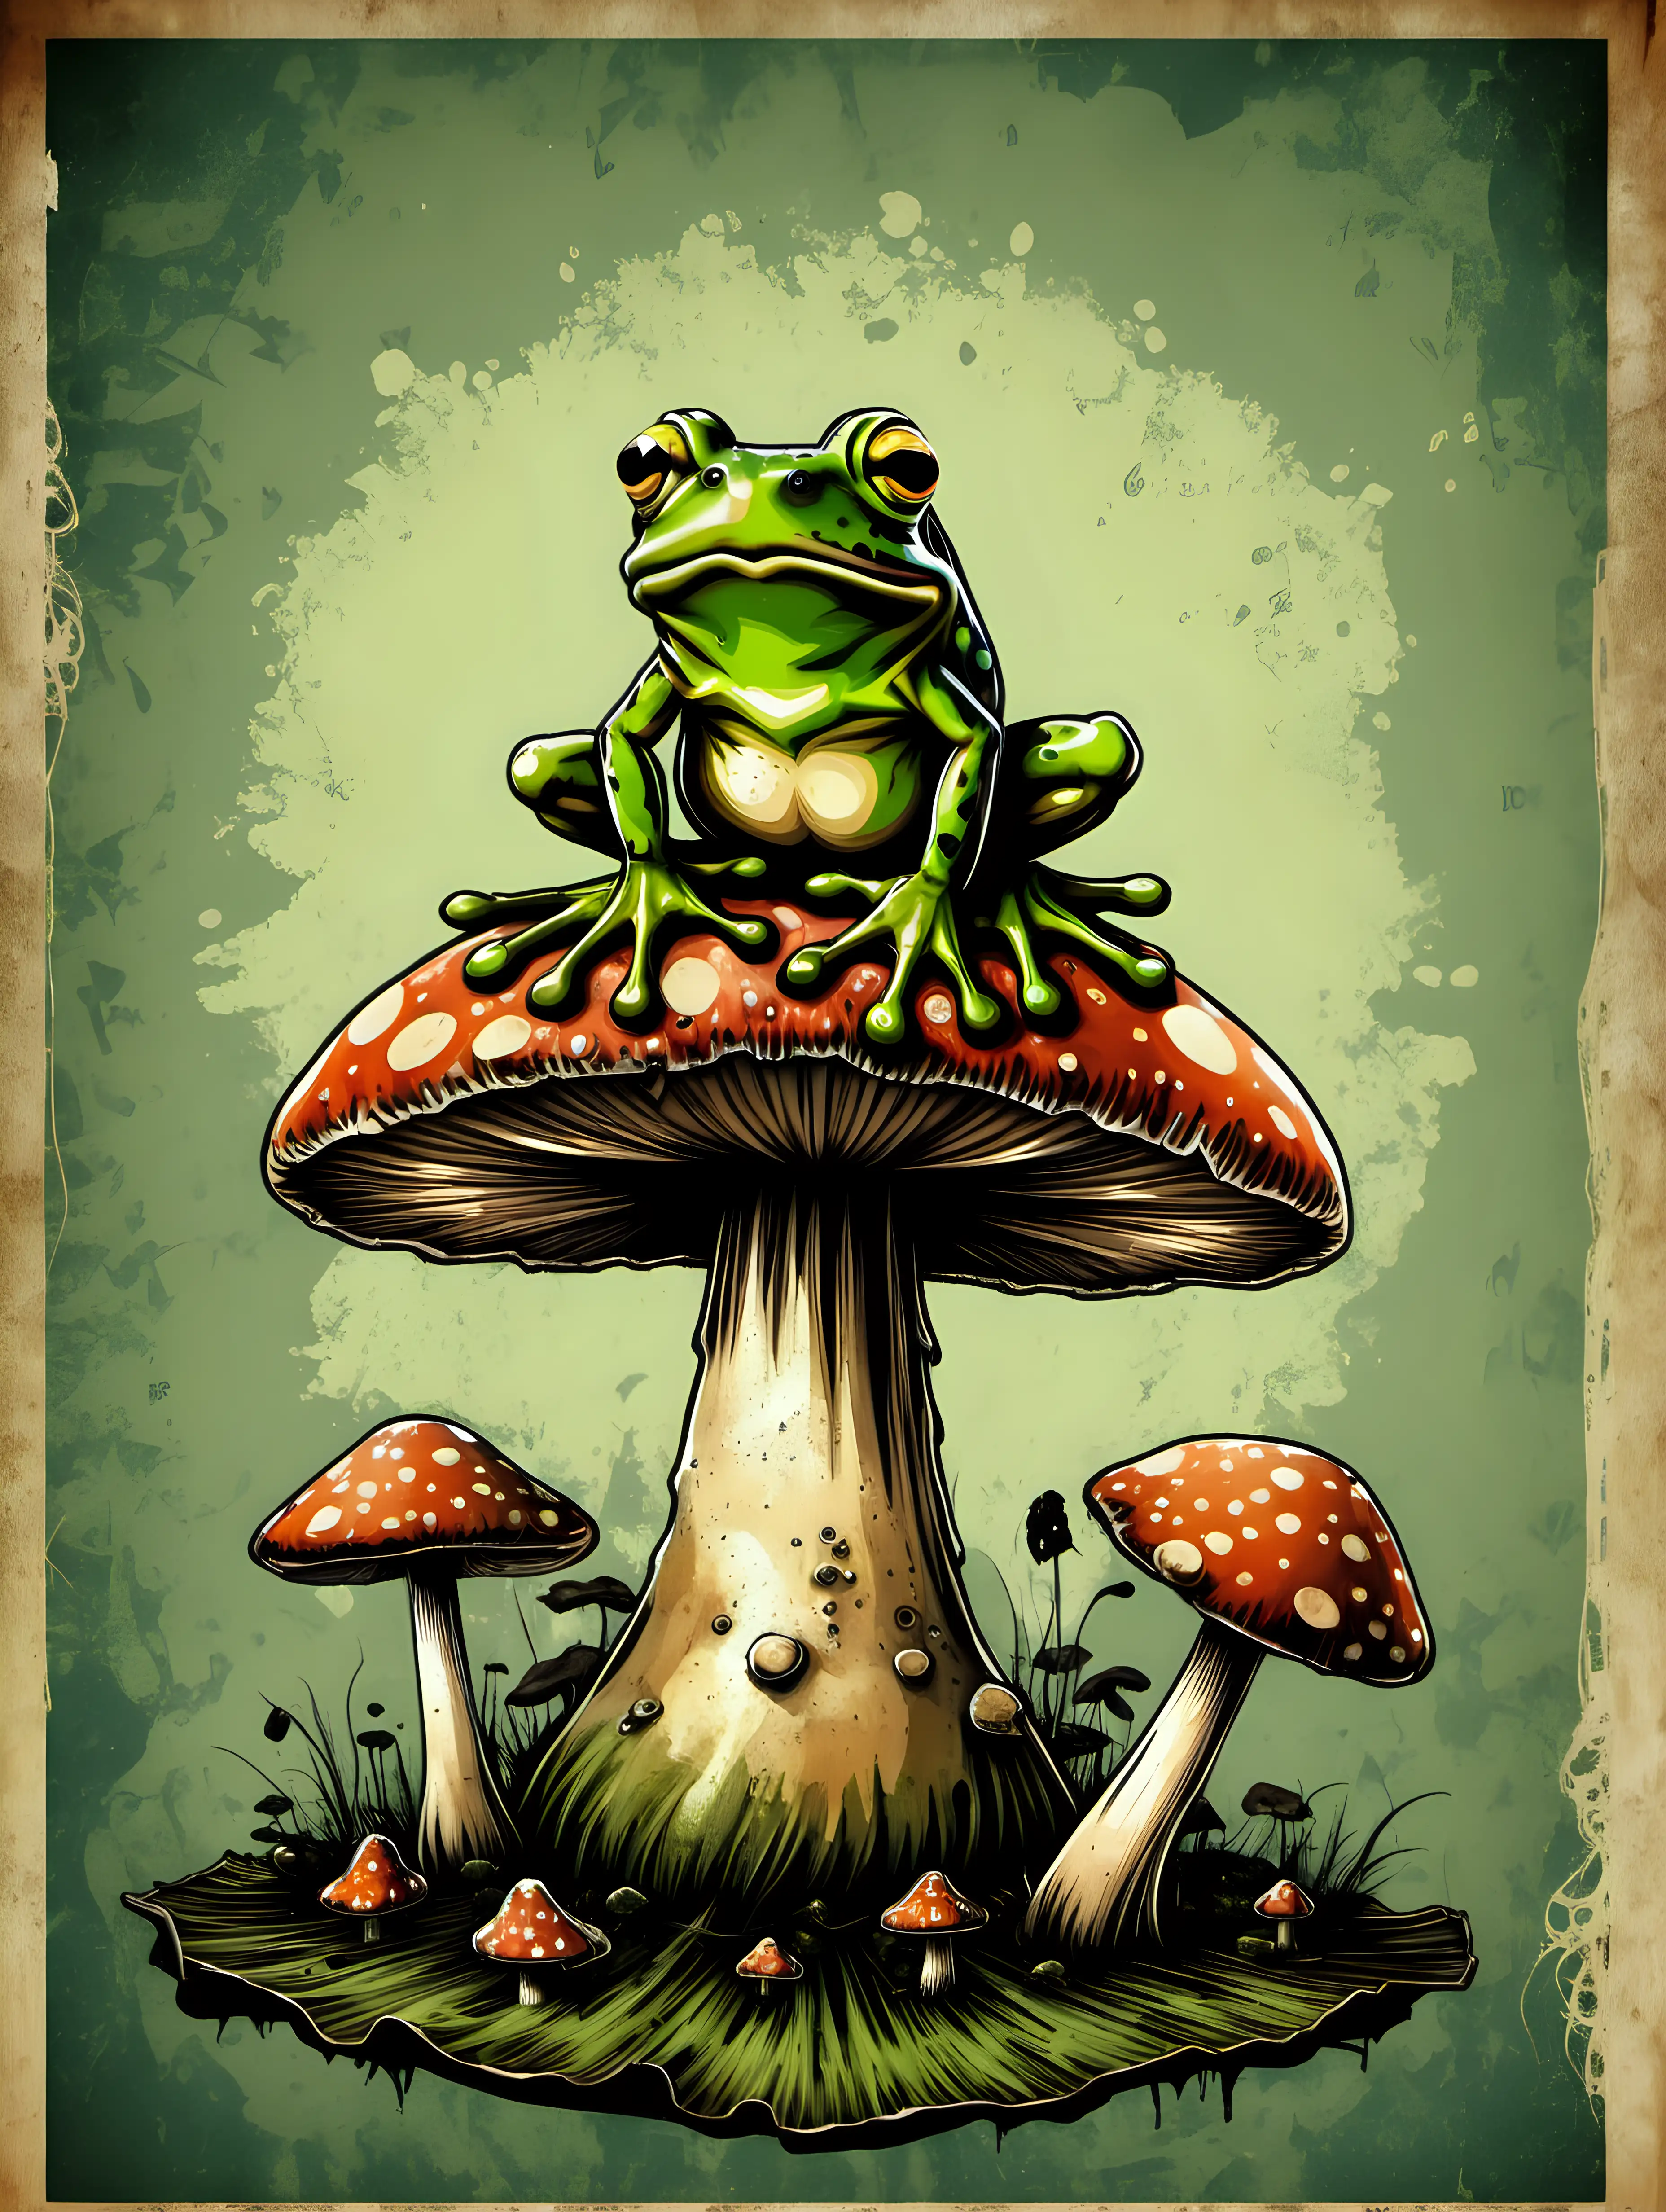 Quirky Grungy Frog Perched on Enchanting Mushroom